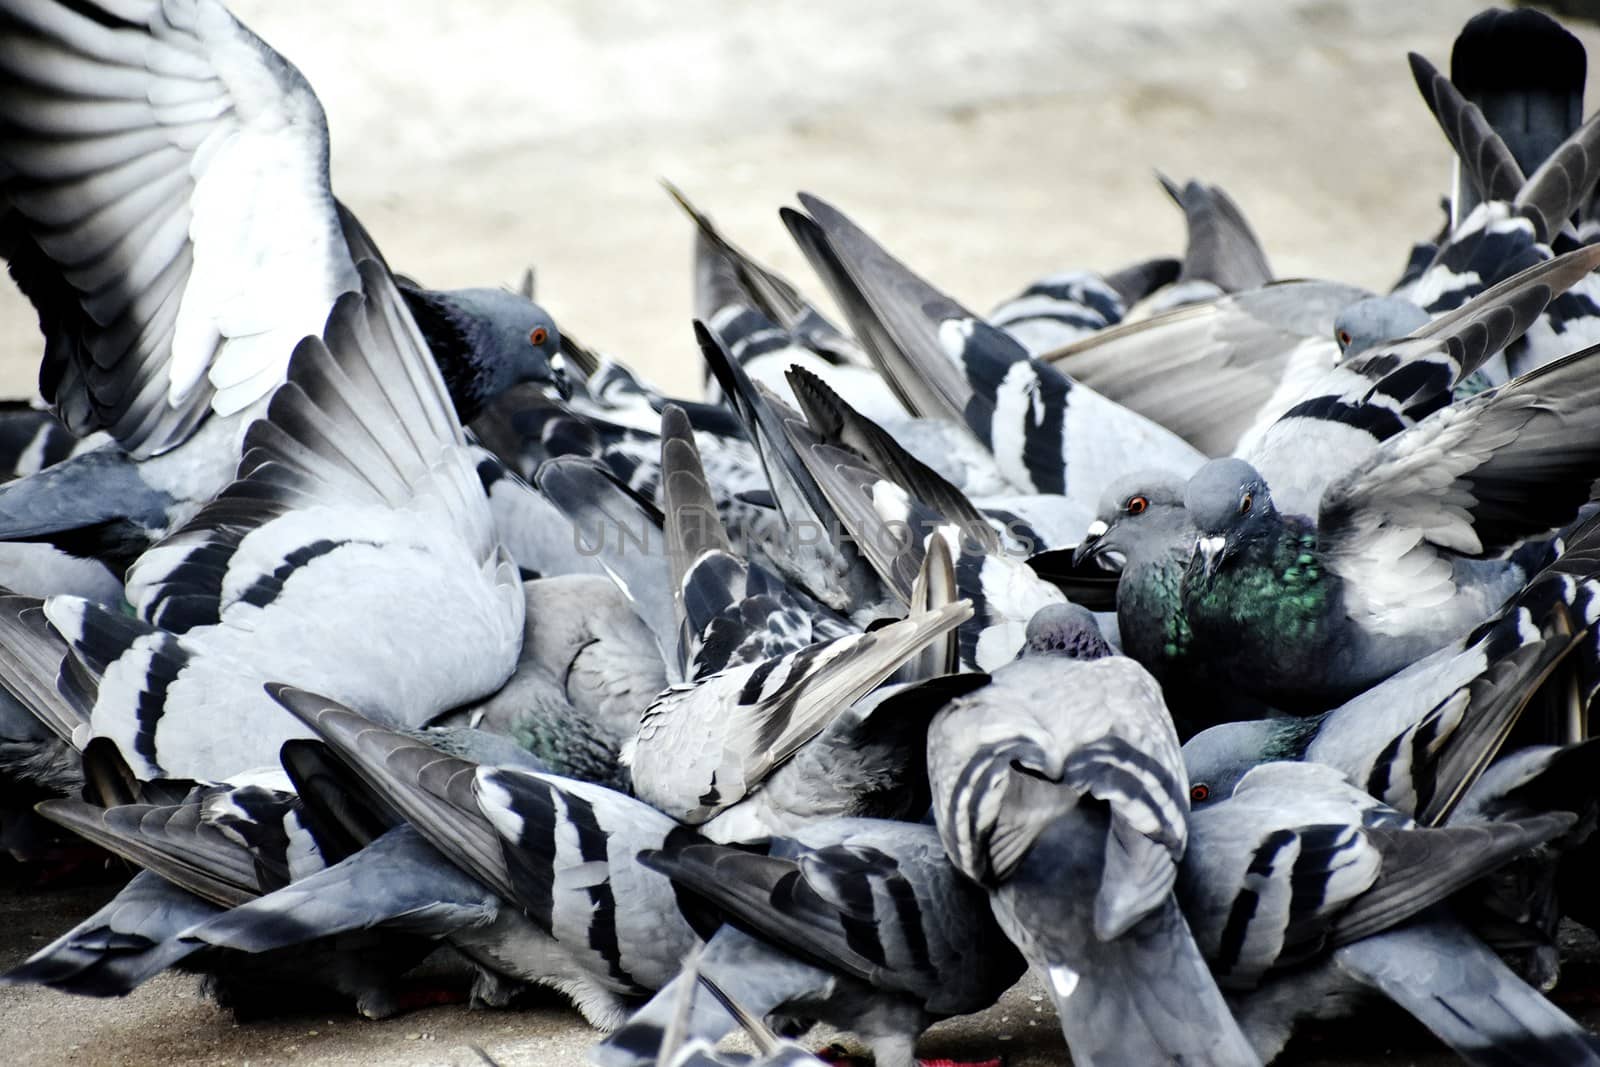 A Group of Pigeons in my ground by ravindrabhu165165@gmail.com